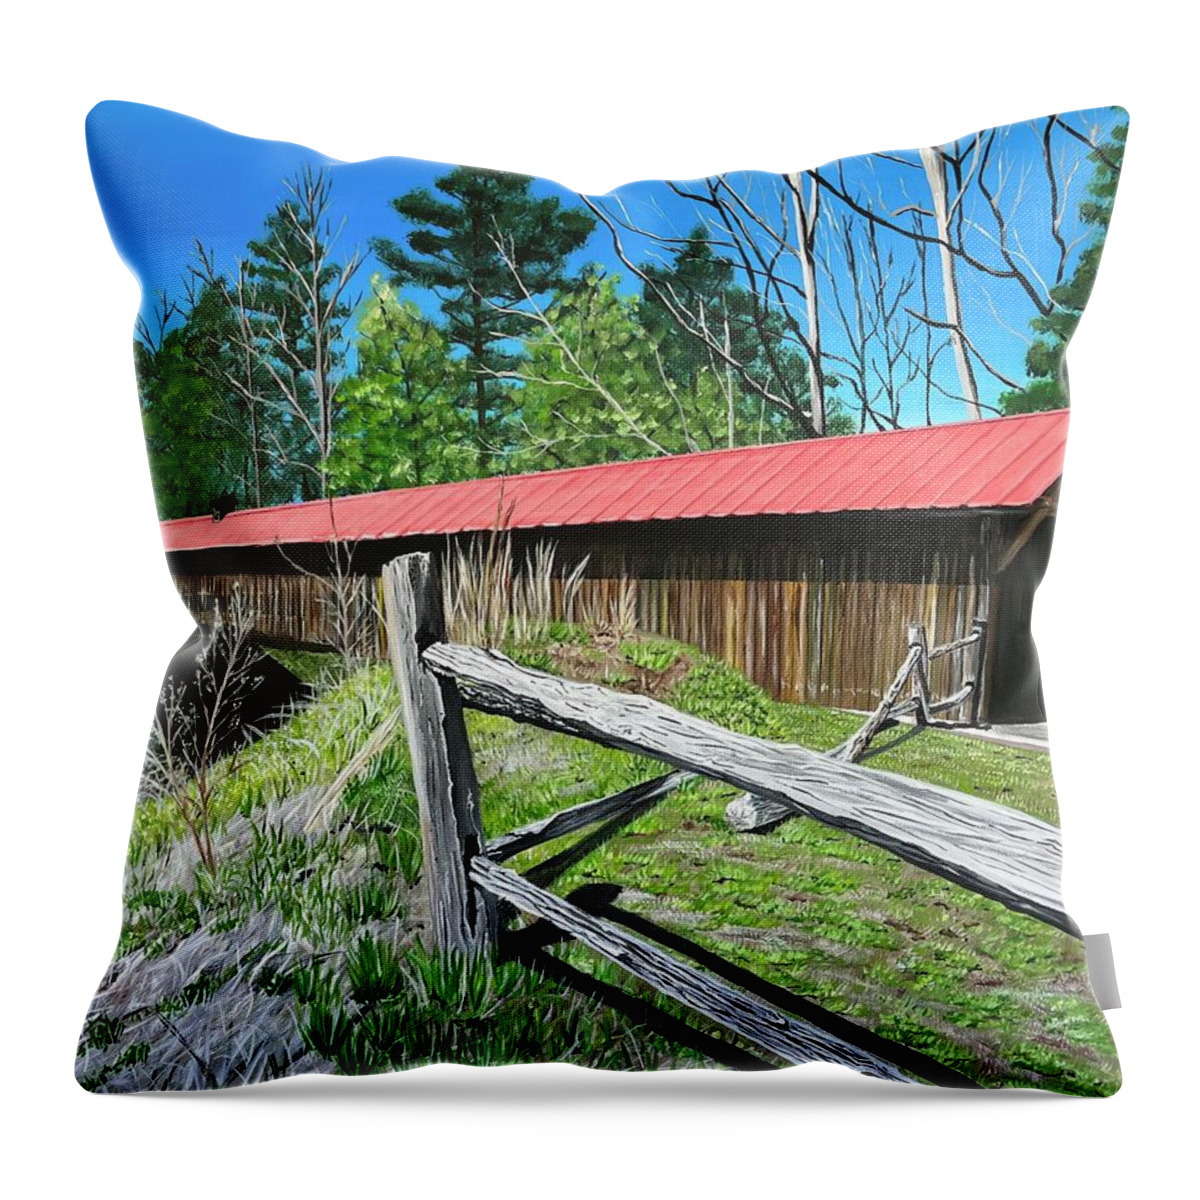 Covered Bridge Throw Pillow featuring the painting Covered Bridge #2 by Boots Quimby